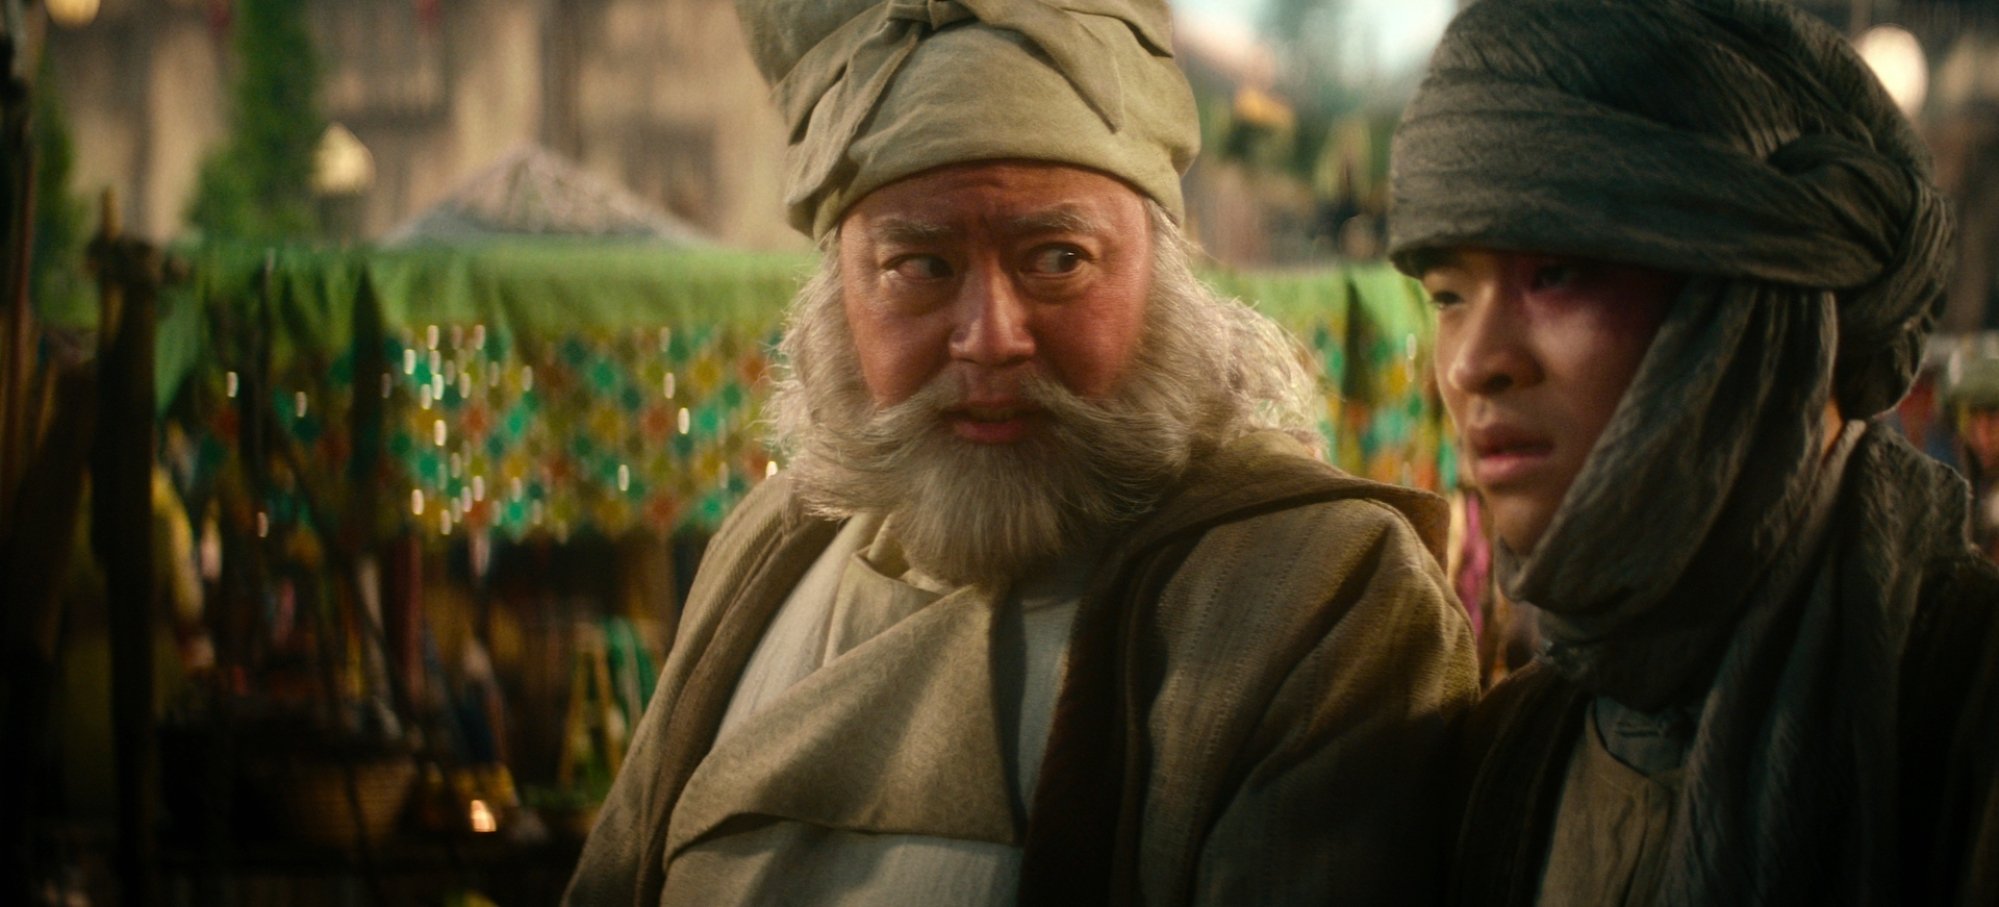 Uncle Iroh (Paul Sun-Hyung Lee) and Prince Zuko (Dallas James Liu) in Netflix's "Avatar: The Last Airbender."